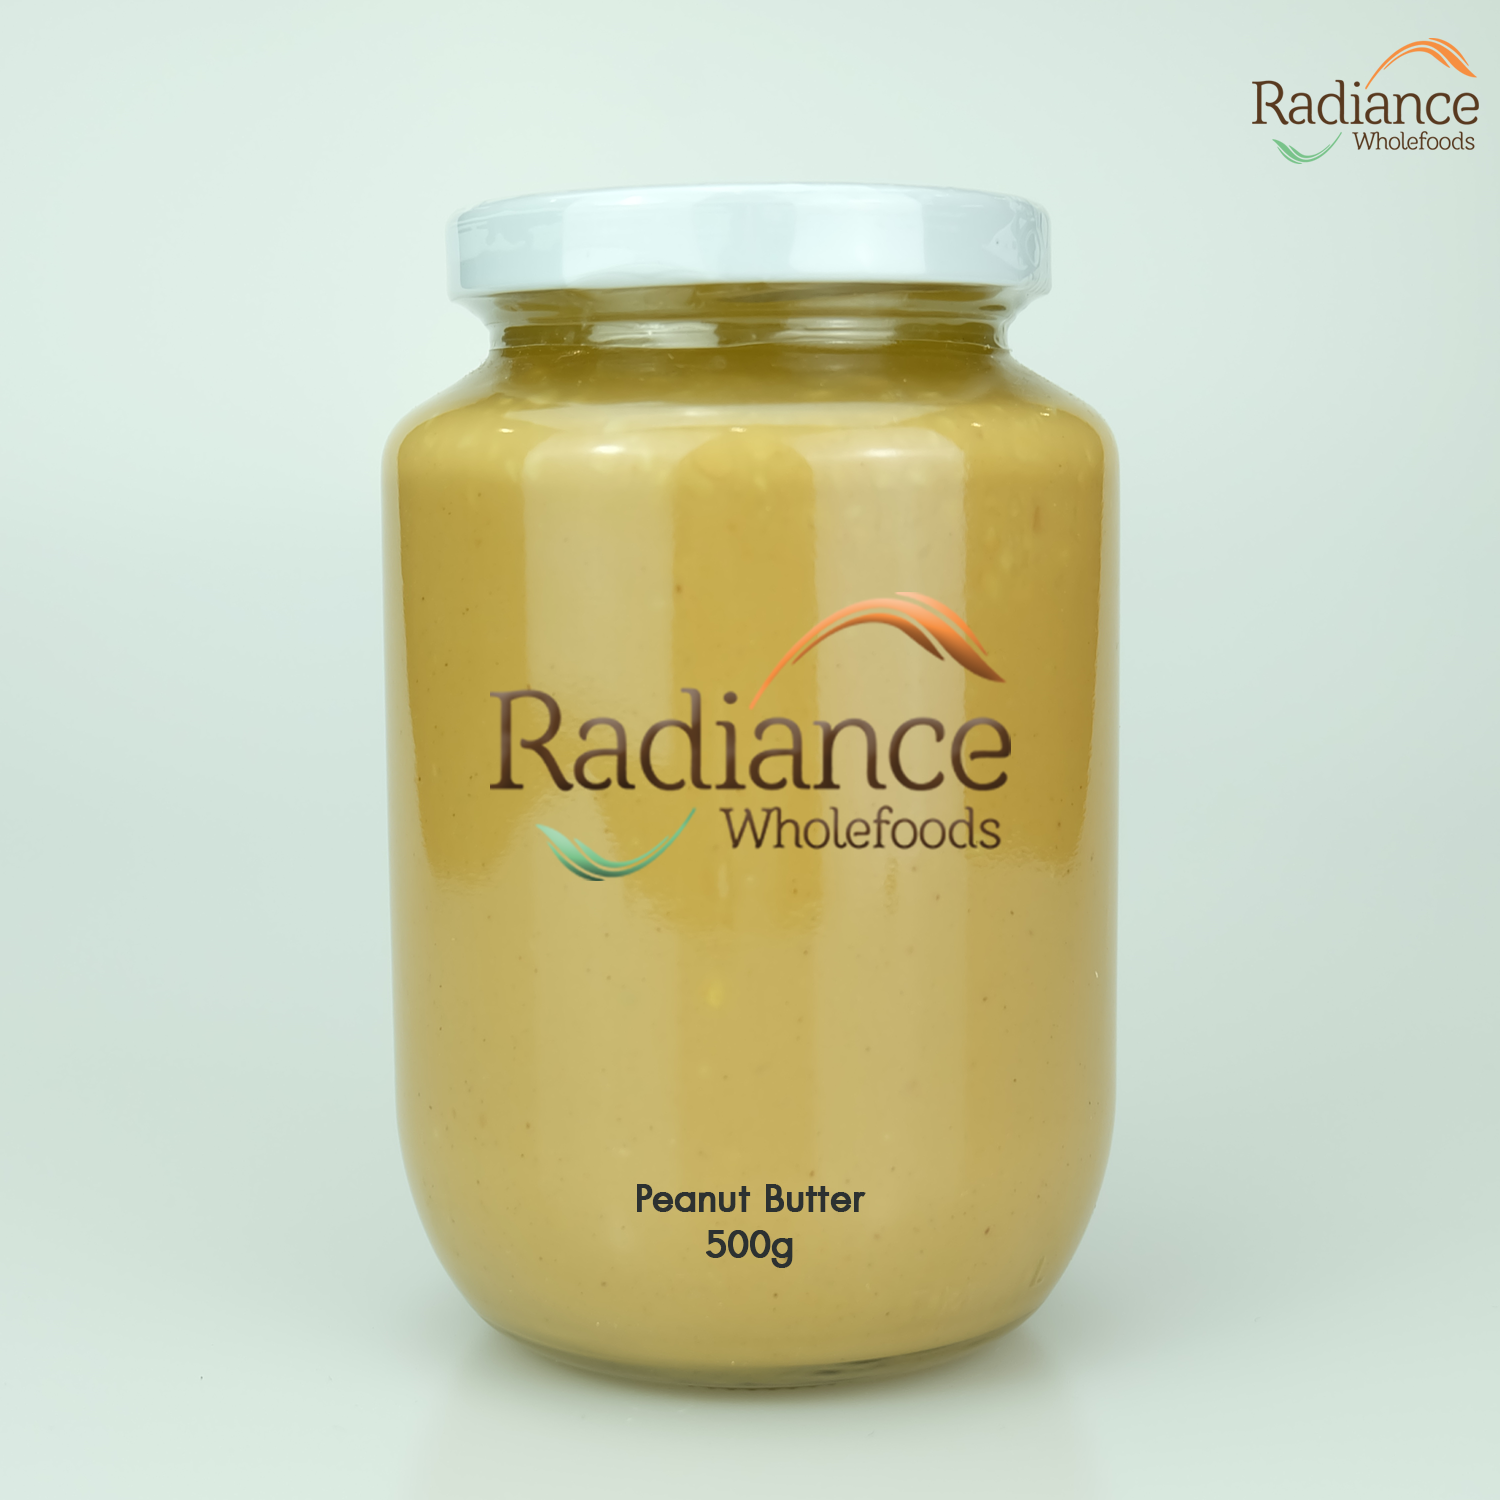 Radiance wholefoods - All Natural Peanut Butter,Creamy